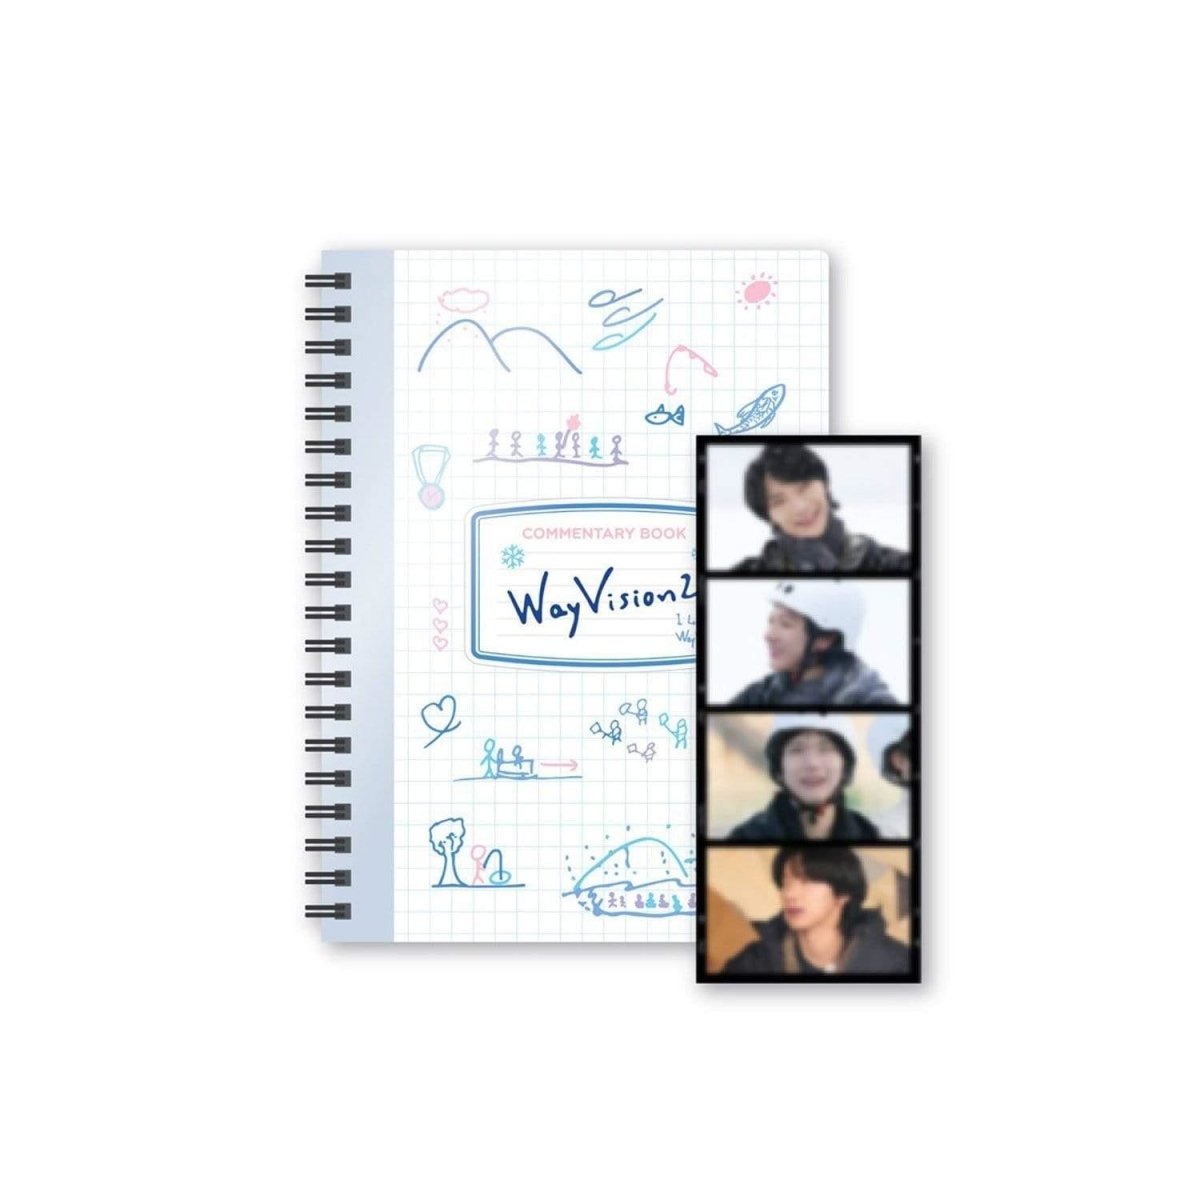 WAYV - Commentary Book and Film Set [Wayvision 2 Goods] - KAVE SQUARE